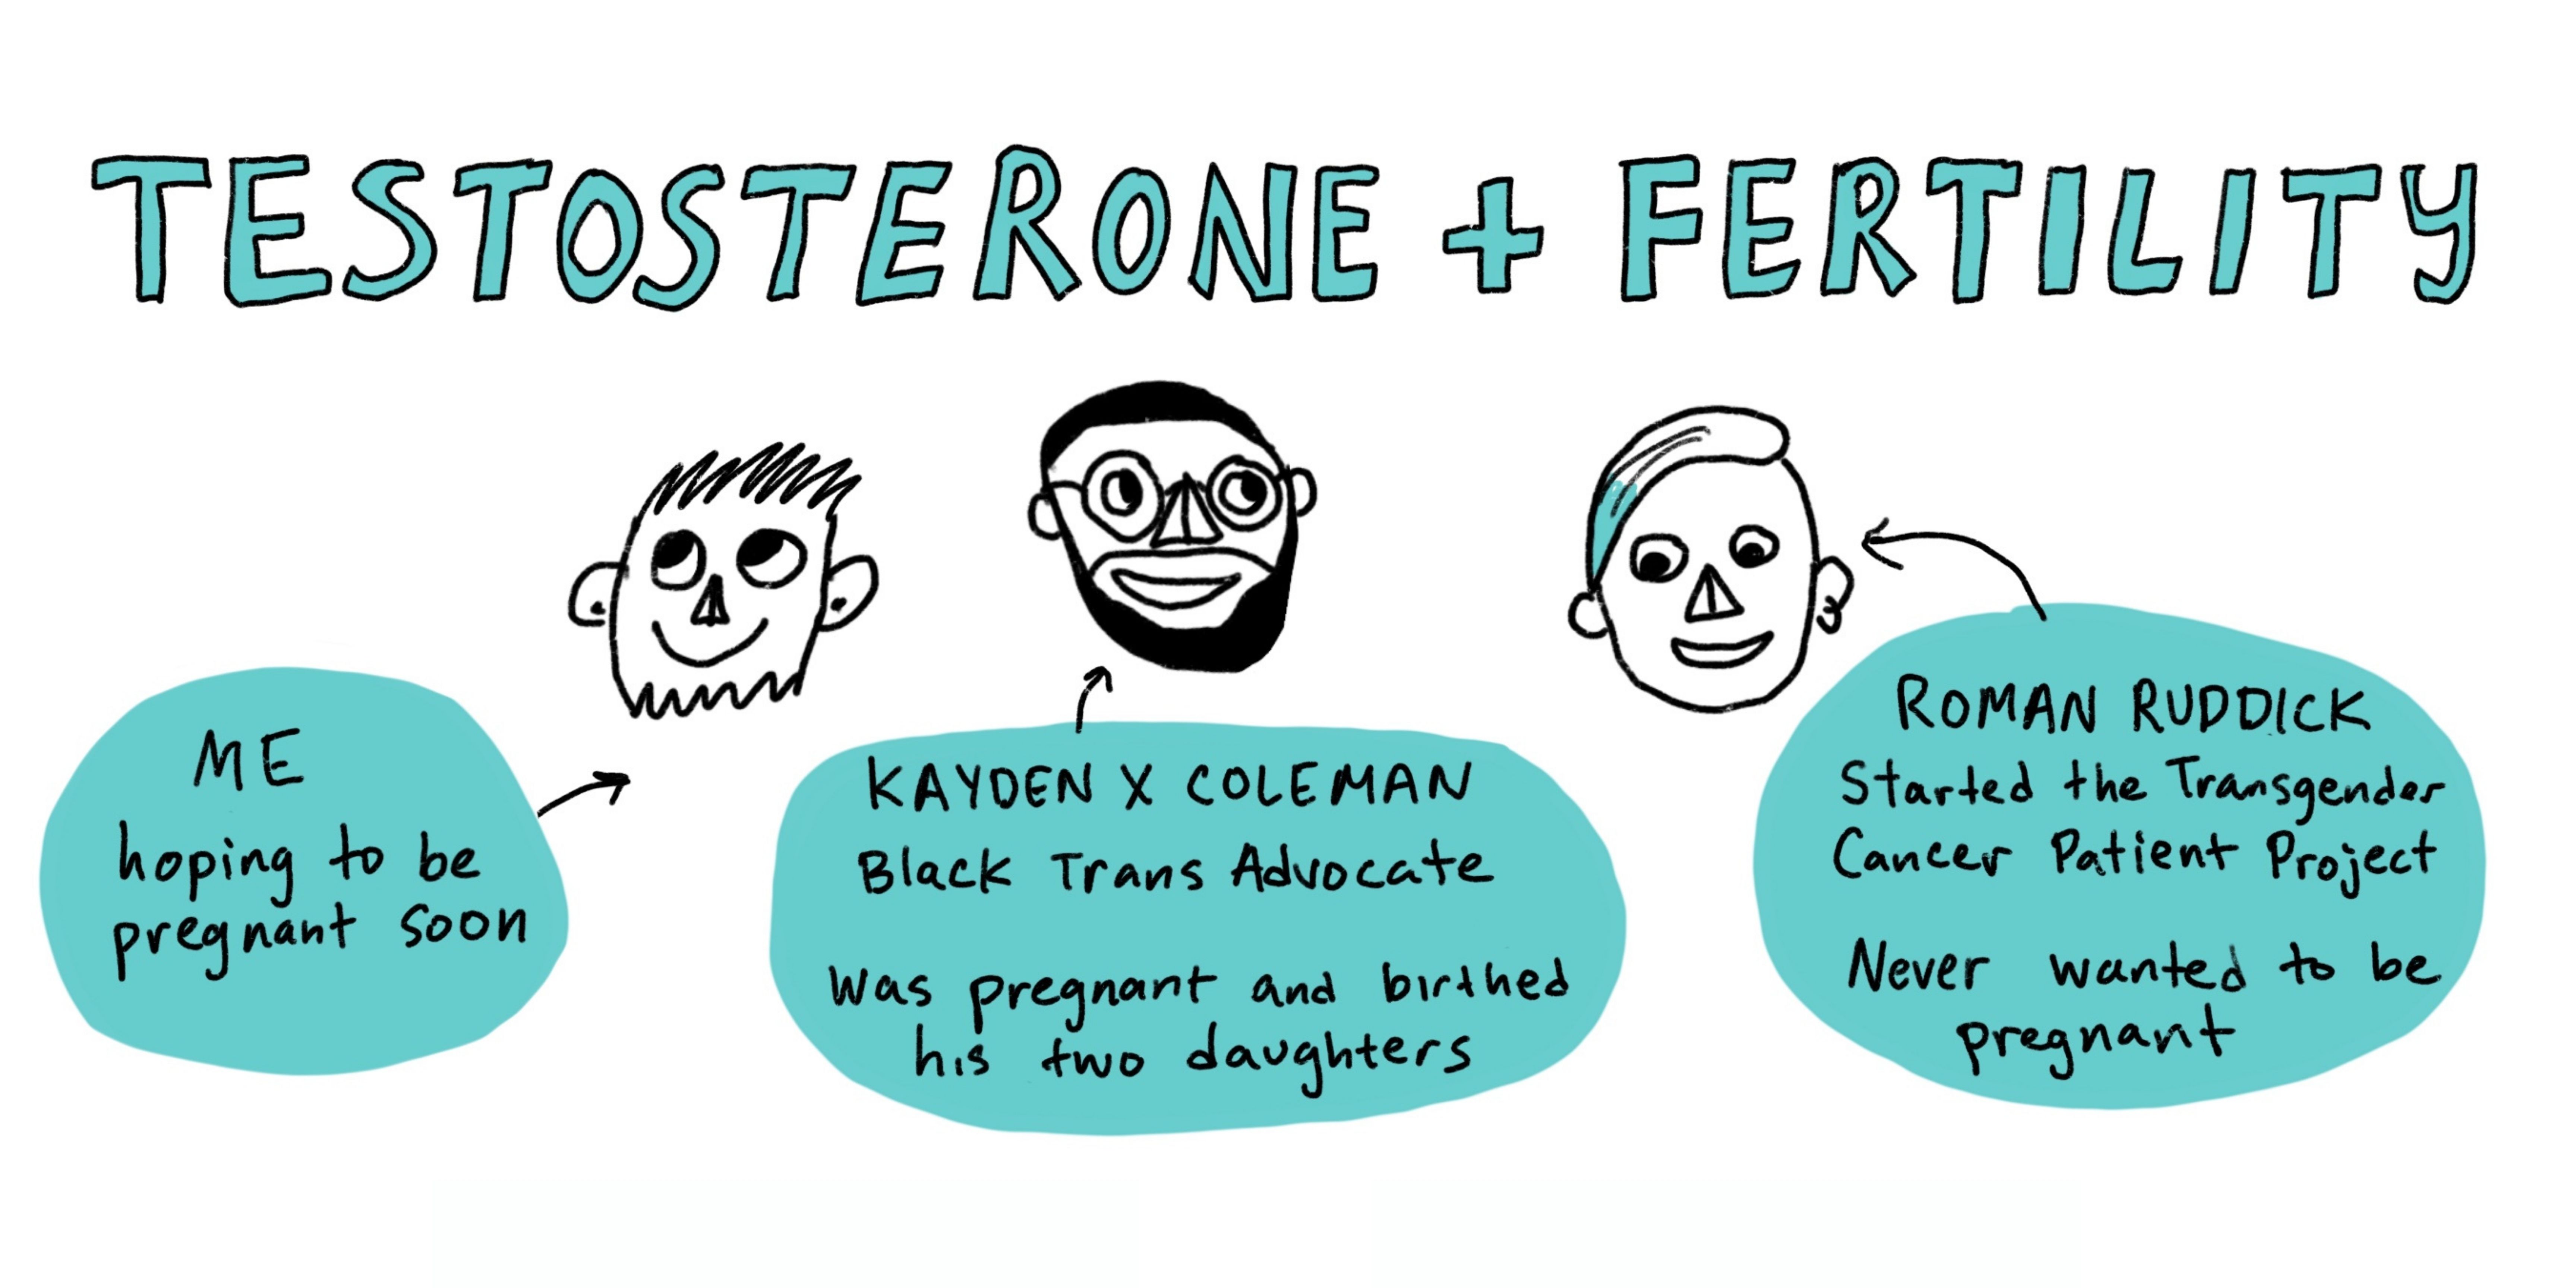 Title- Testosterone and Fertility. Images of three faces, labeled, “Me, hoping to be pregnant soon,” “Kayden X Coleman, Black trans advocate was pregnant and birthed his two daughters,” “Roman Ruddick, started the Transgender Cancer Patient Project.